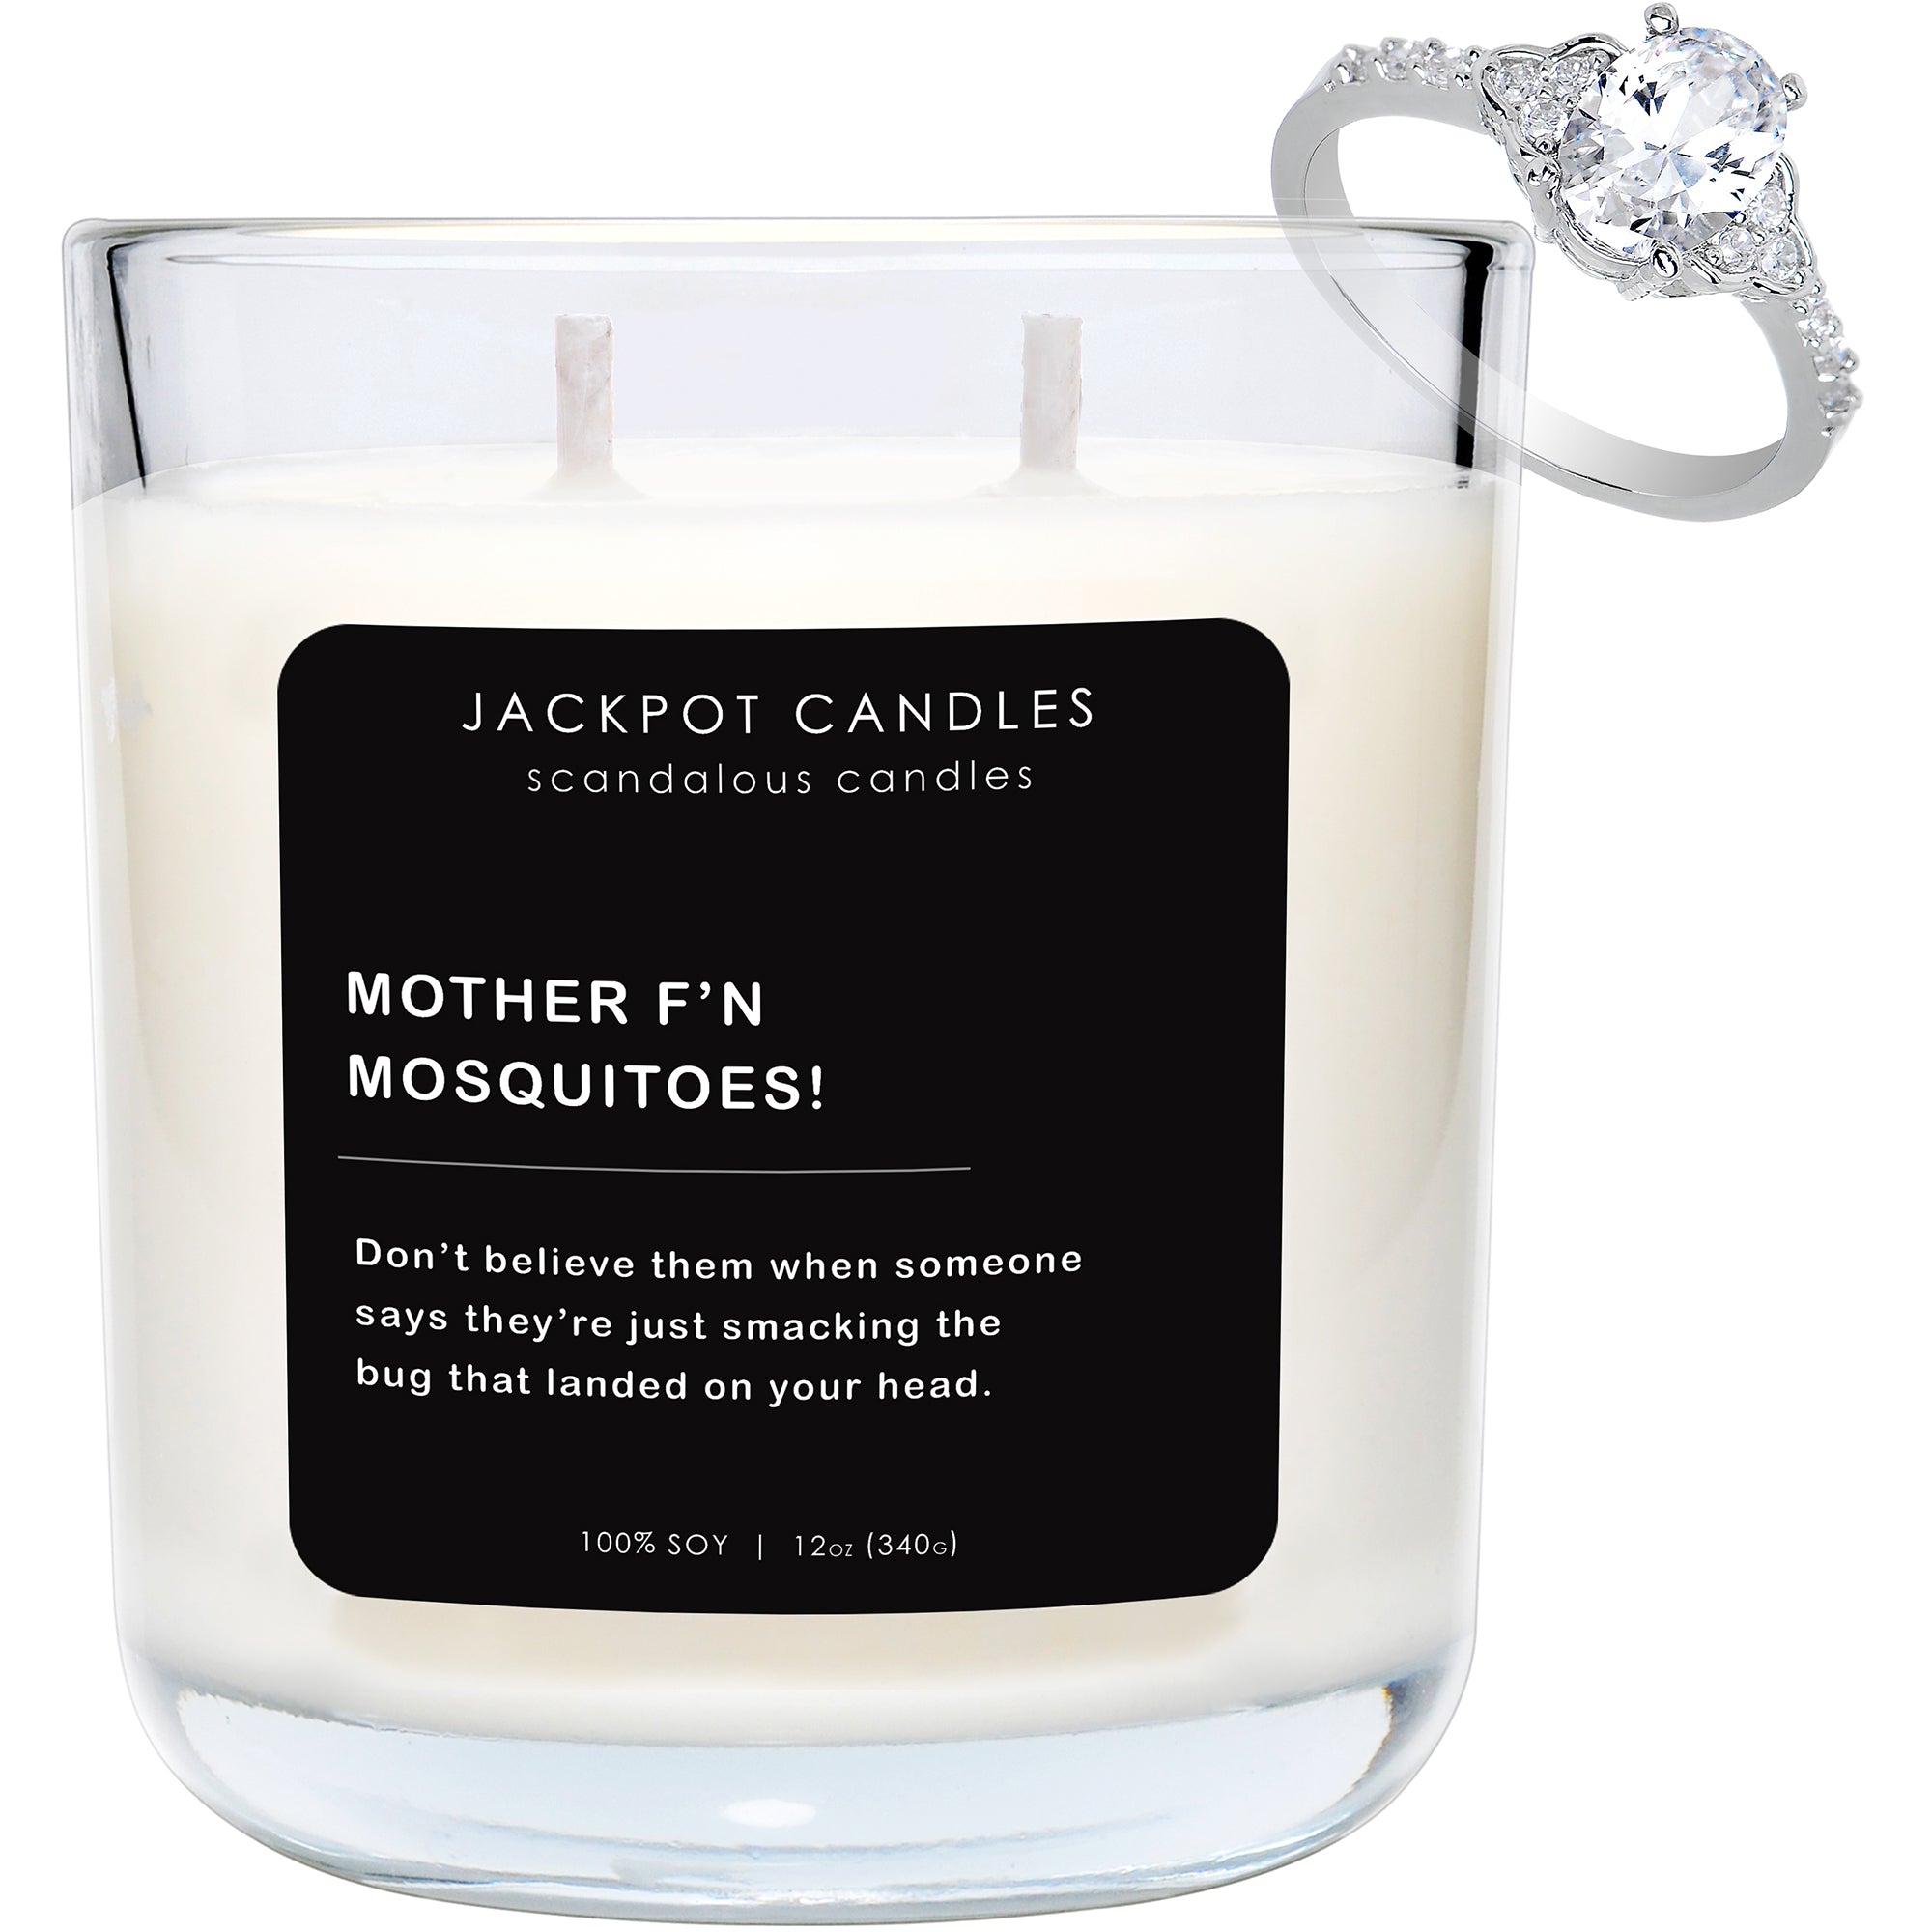 Mother F'N Mosquitoes Scandalous Candle